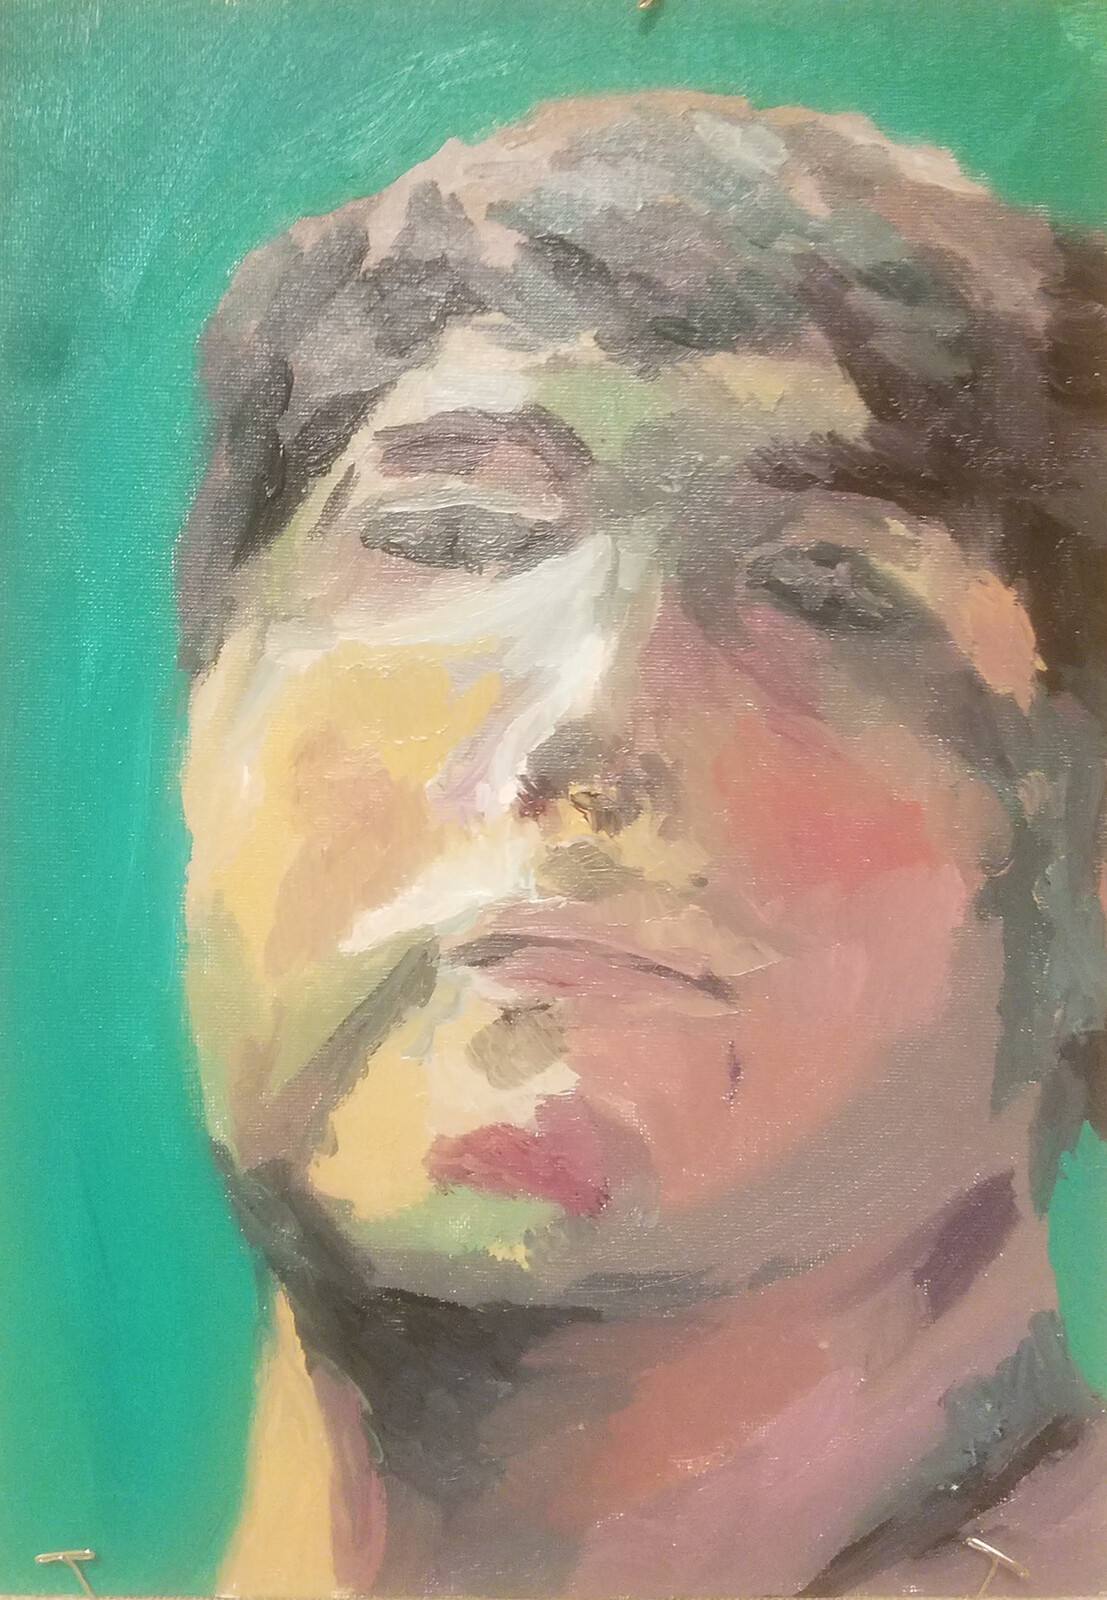 Abstract Self-Portrait 2, Oil on Canvas, 2020